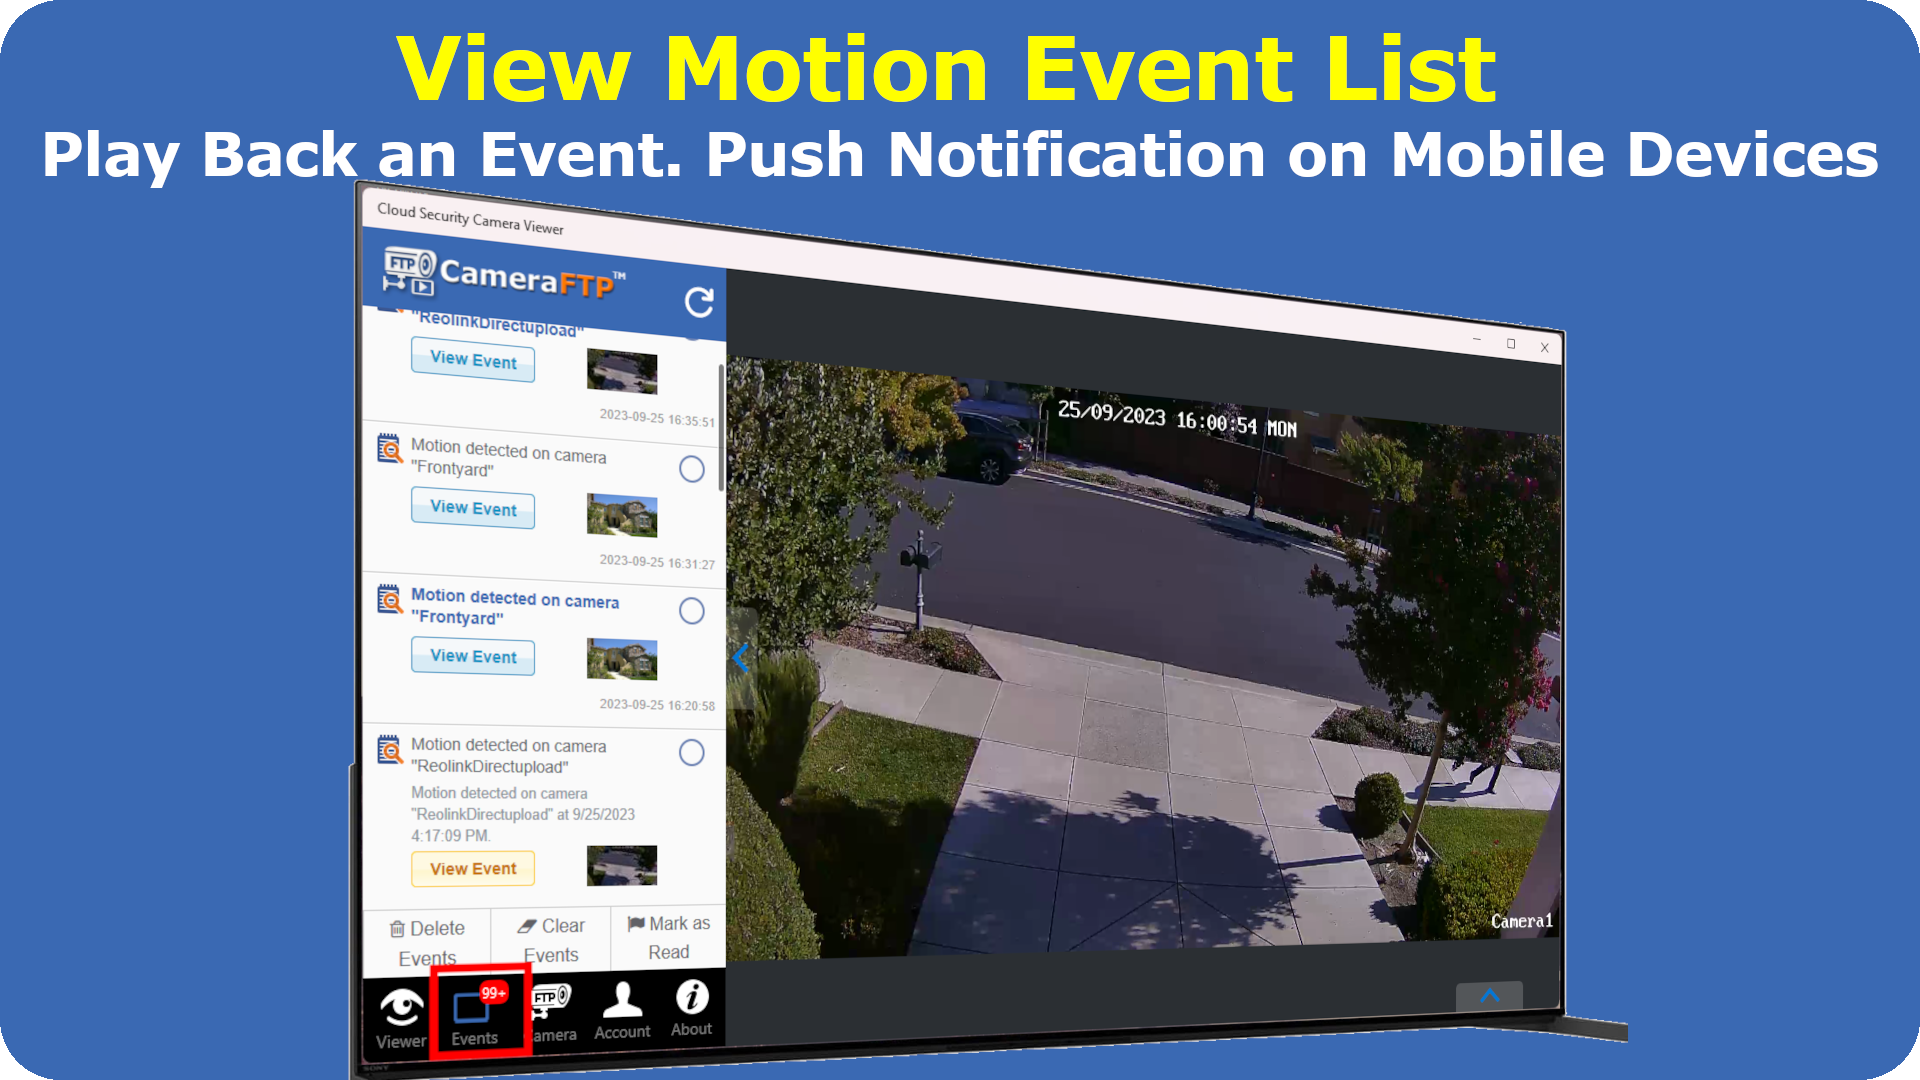 View motion event list; select an event and play the recorded video. CameraFTP can send push notification to your smartphone if you install CameraFTP Viewer.